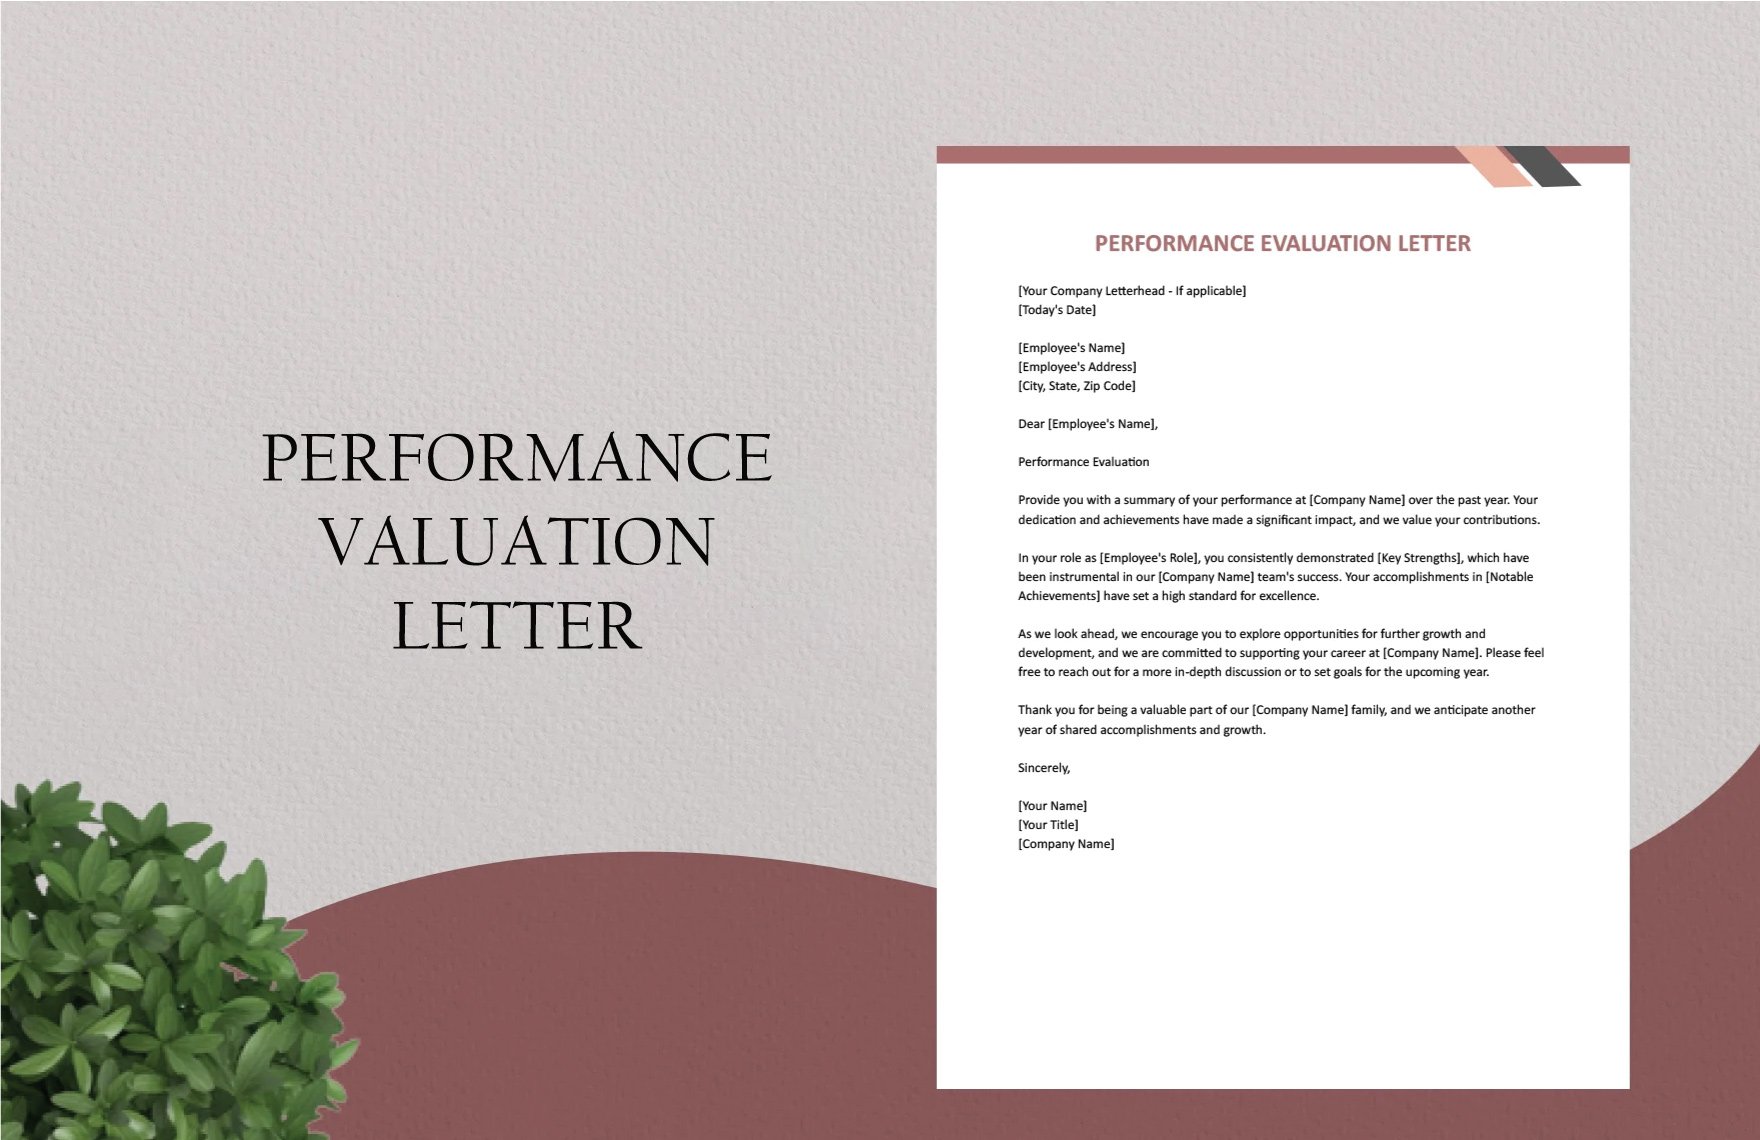 Performance Evaluation Letter in Word, Google Docs